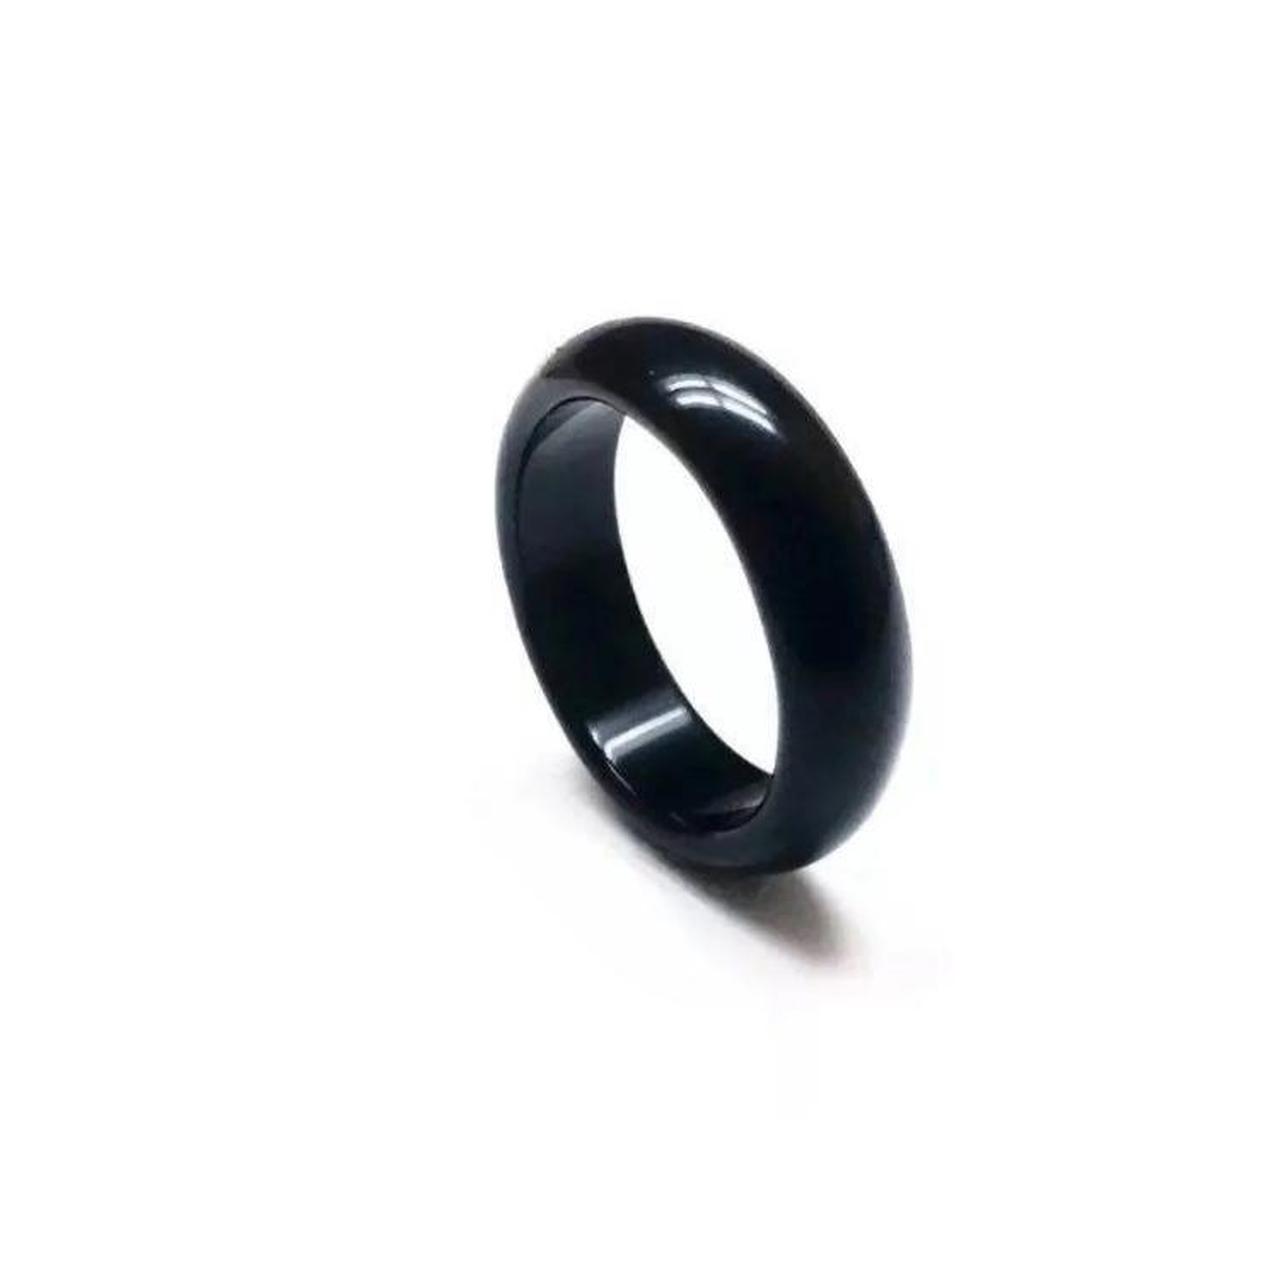 Product Image 1 - Black obsidian ring size 6
condition: